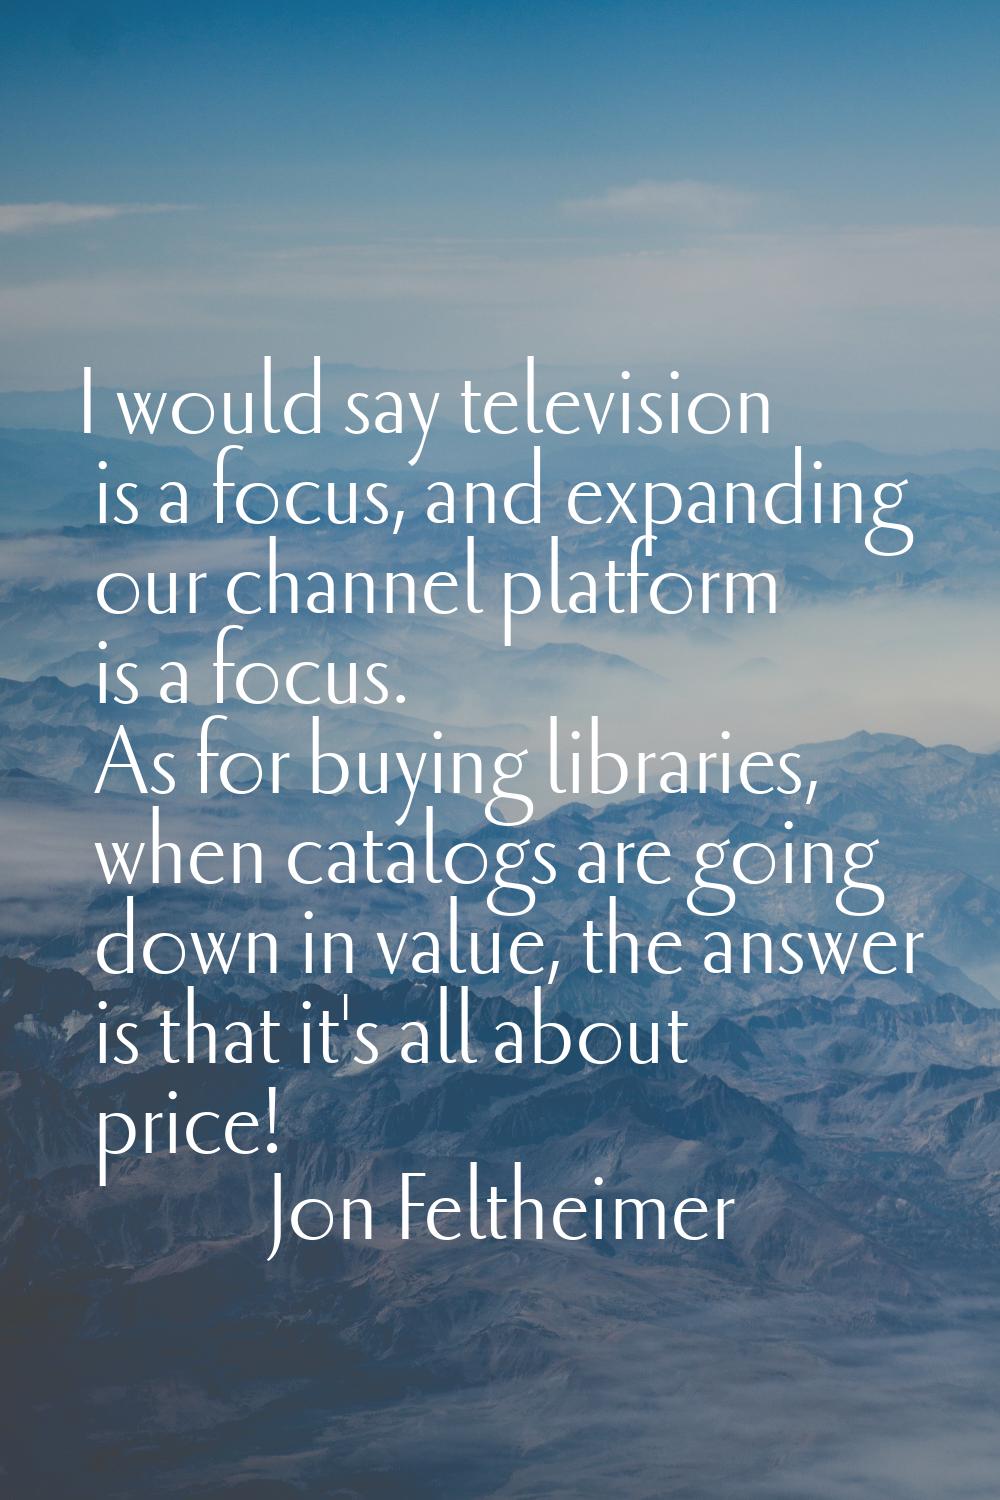 I would say television is a focus, and expanding our channel platform is a focus. As for buying lib